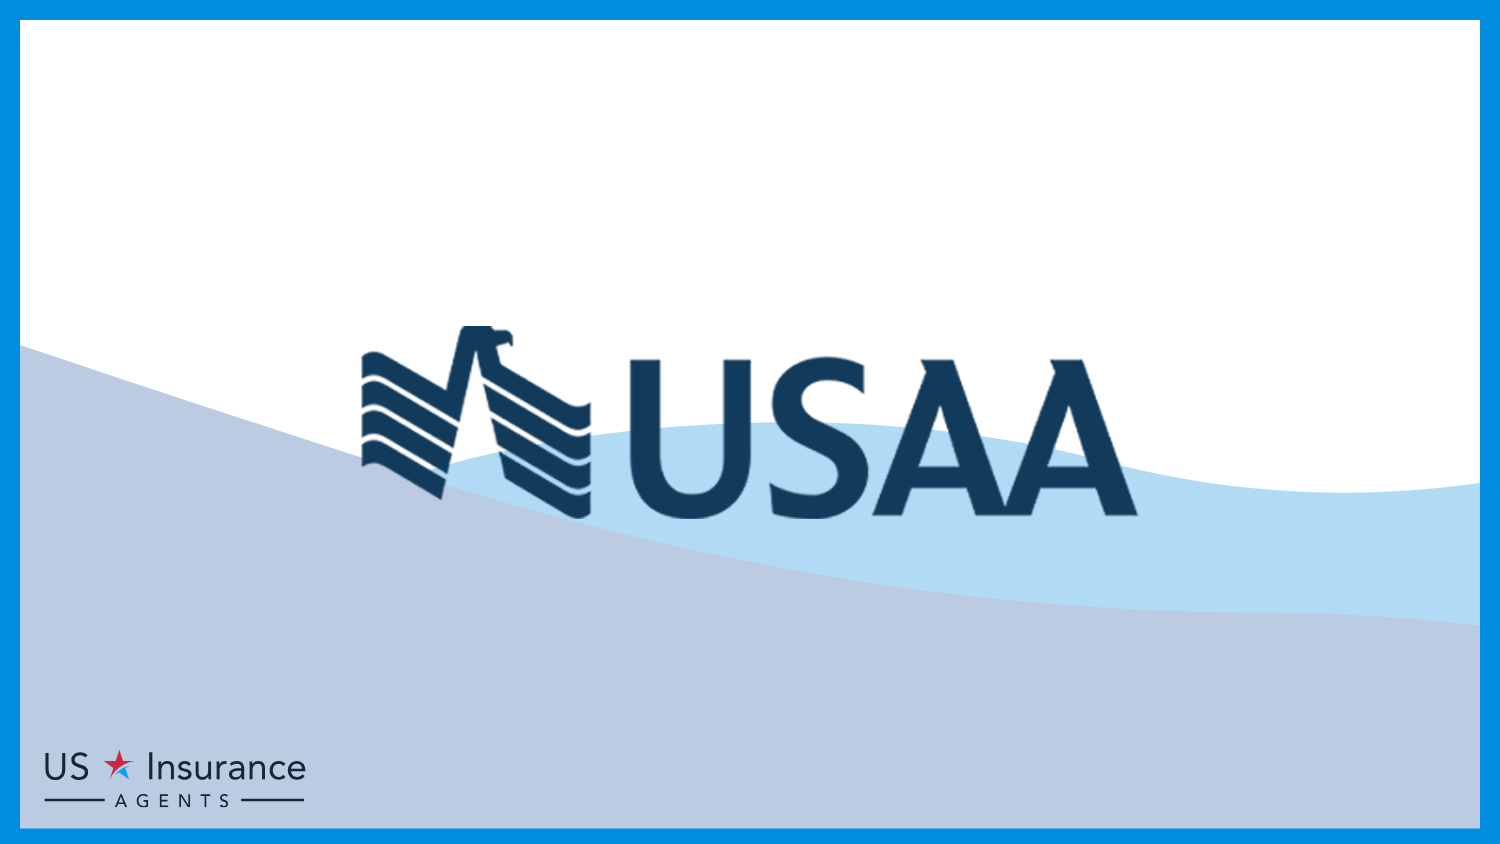 Best Business Insurance for Contractors: USAA